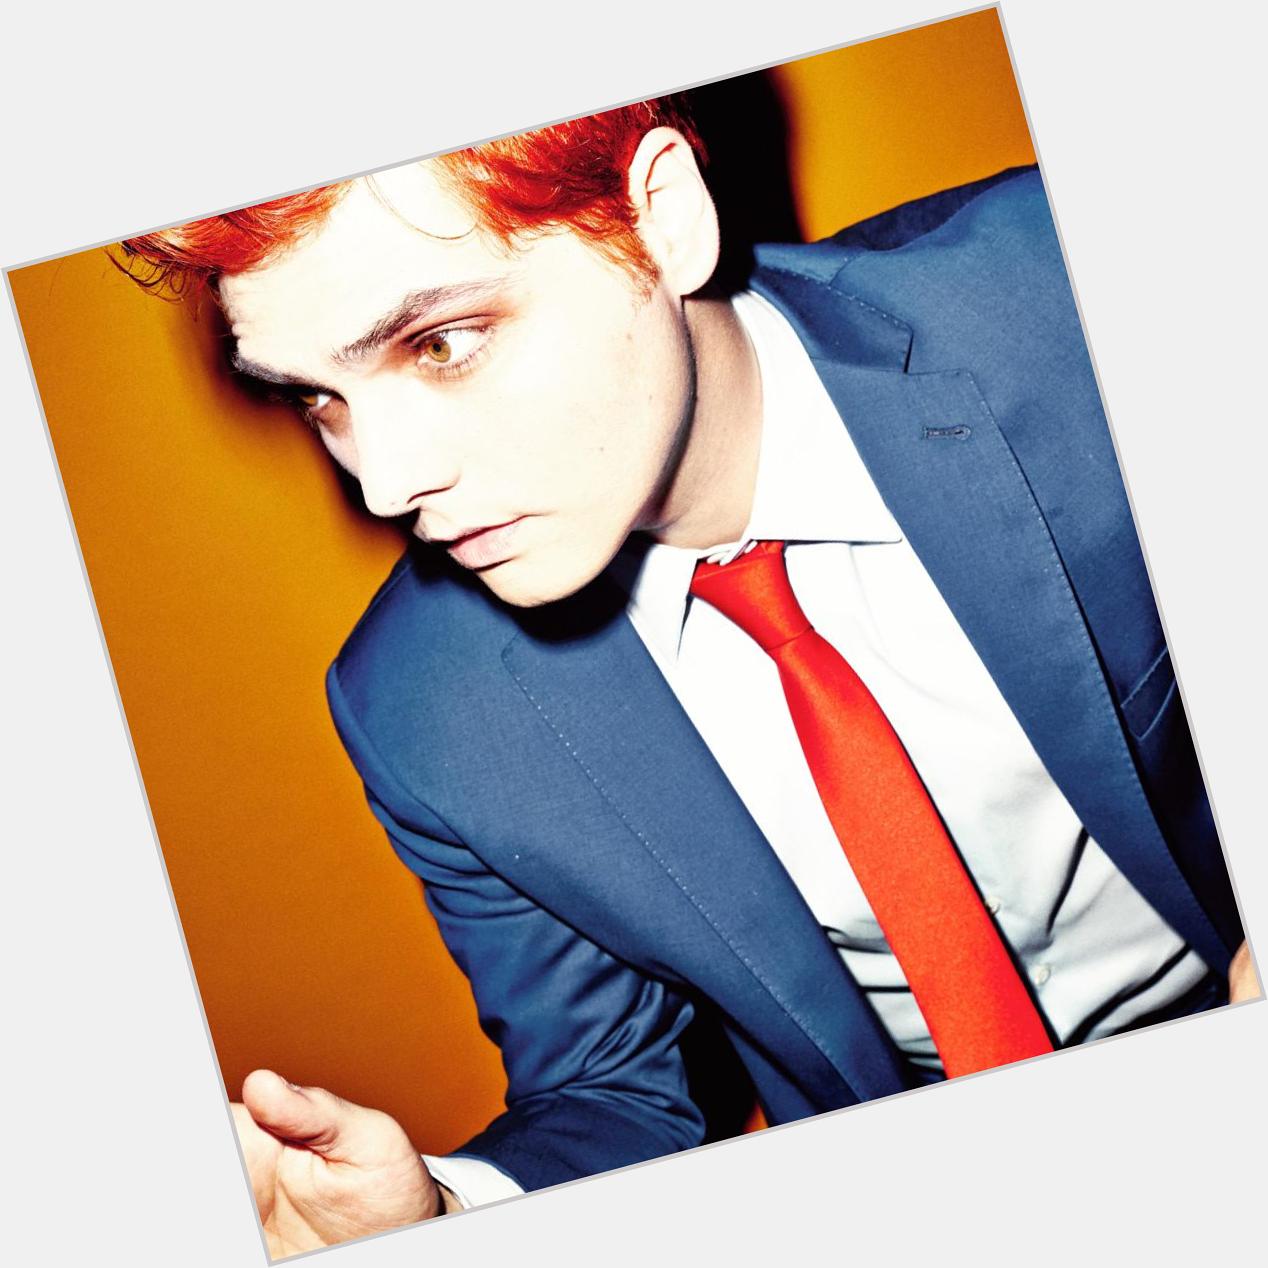  Happy Birthday to baby Gee. (Gerard Way.) He is now 38. <3 Hope he has a great birthday.      